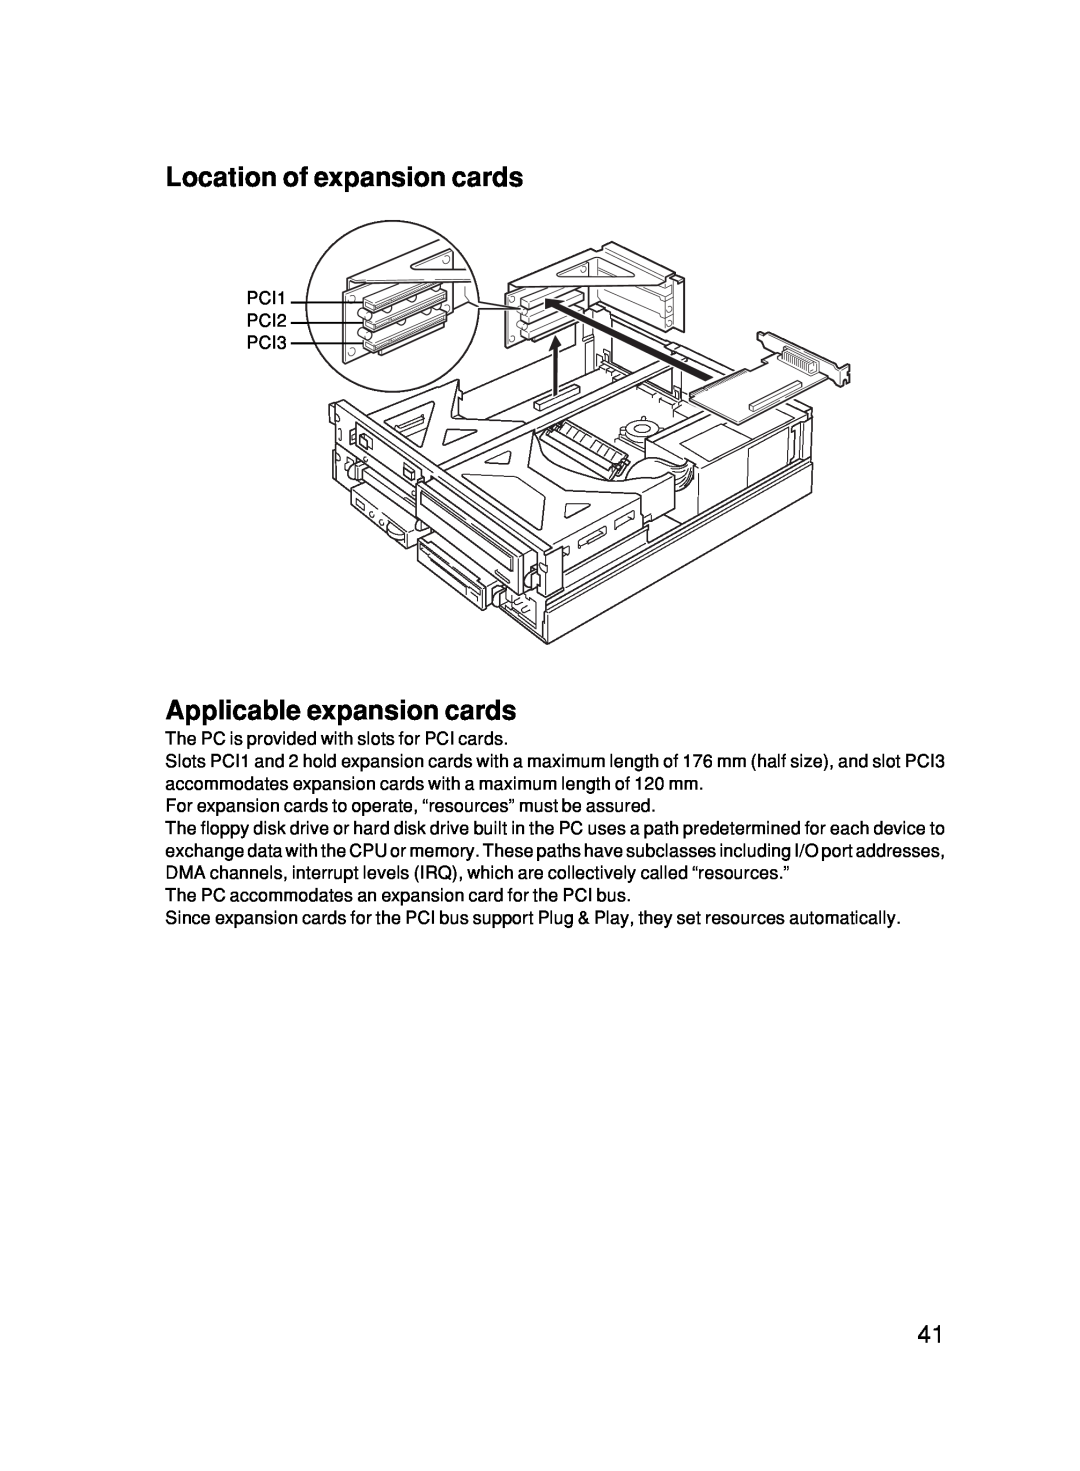 Fujitsu 500 user manual Location of expansion cards, Applicable expansion cards 